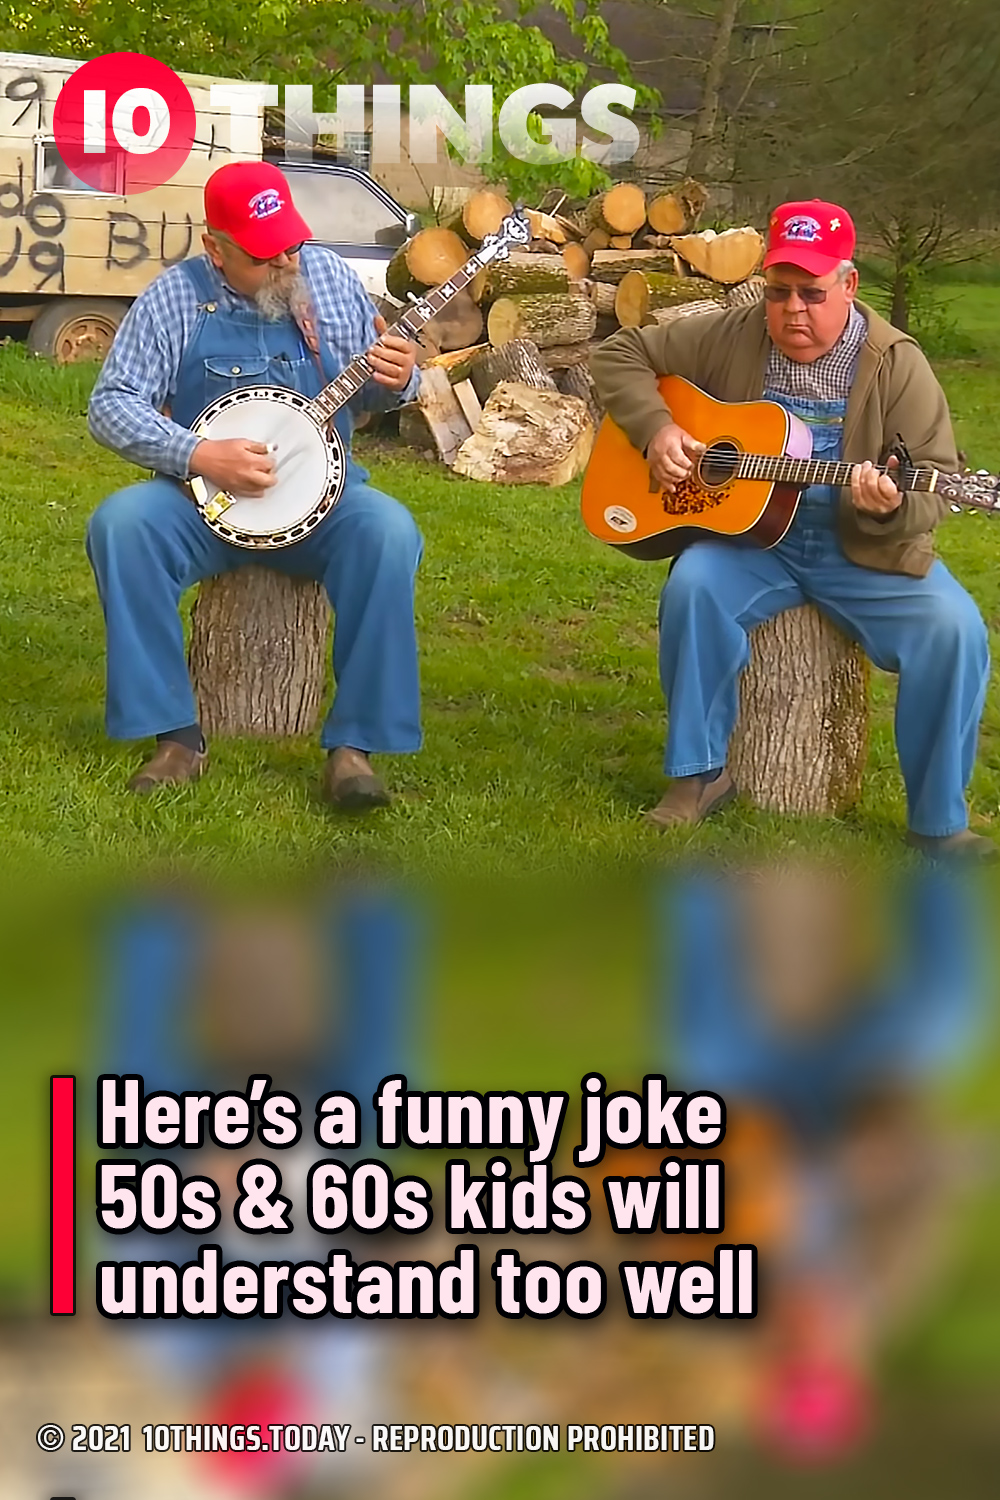 Here’s a funny joke 50s & 60s kids will understand too well